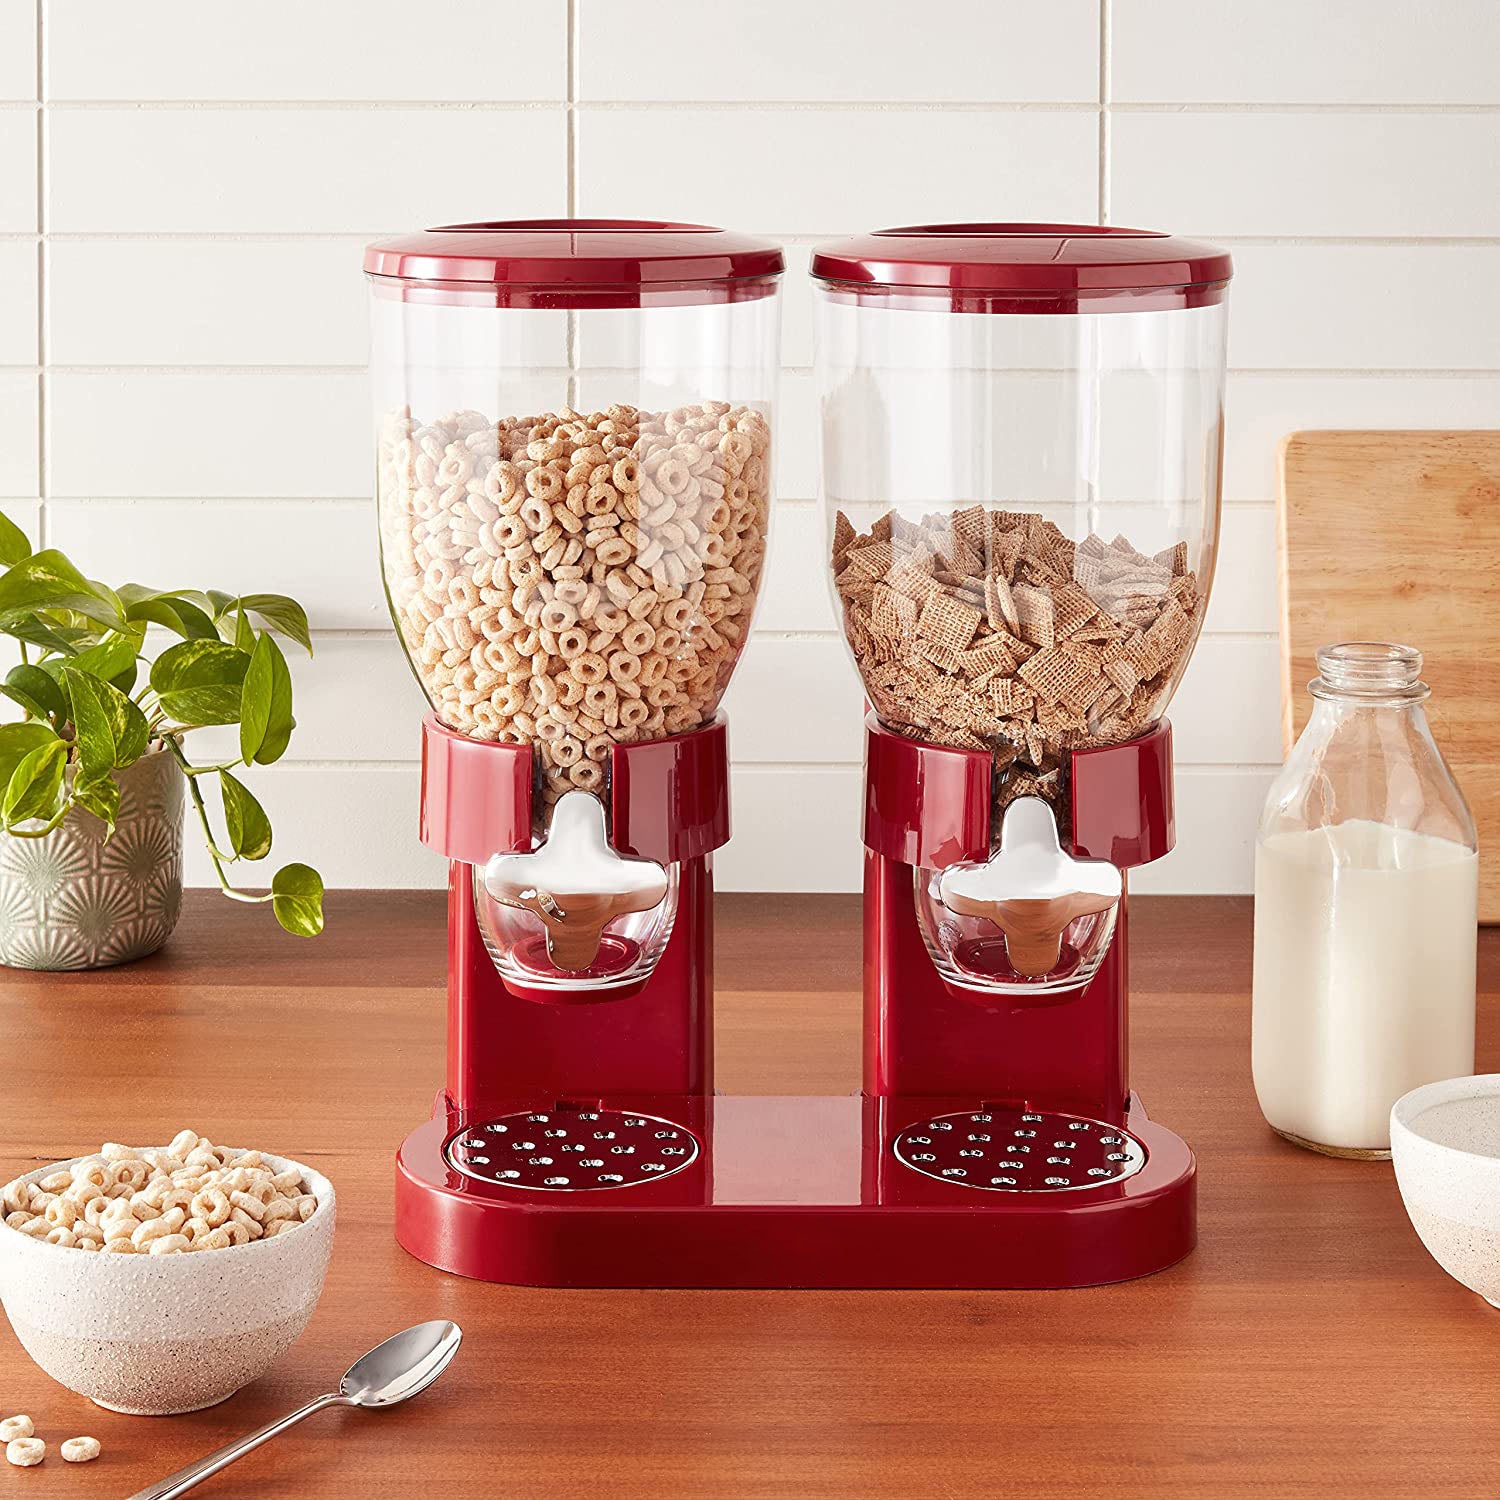 Double Barrel Cereal Dispenser with Portion Control 1000 grams